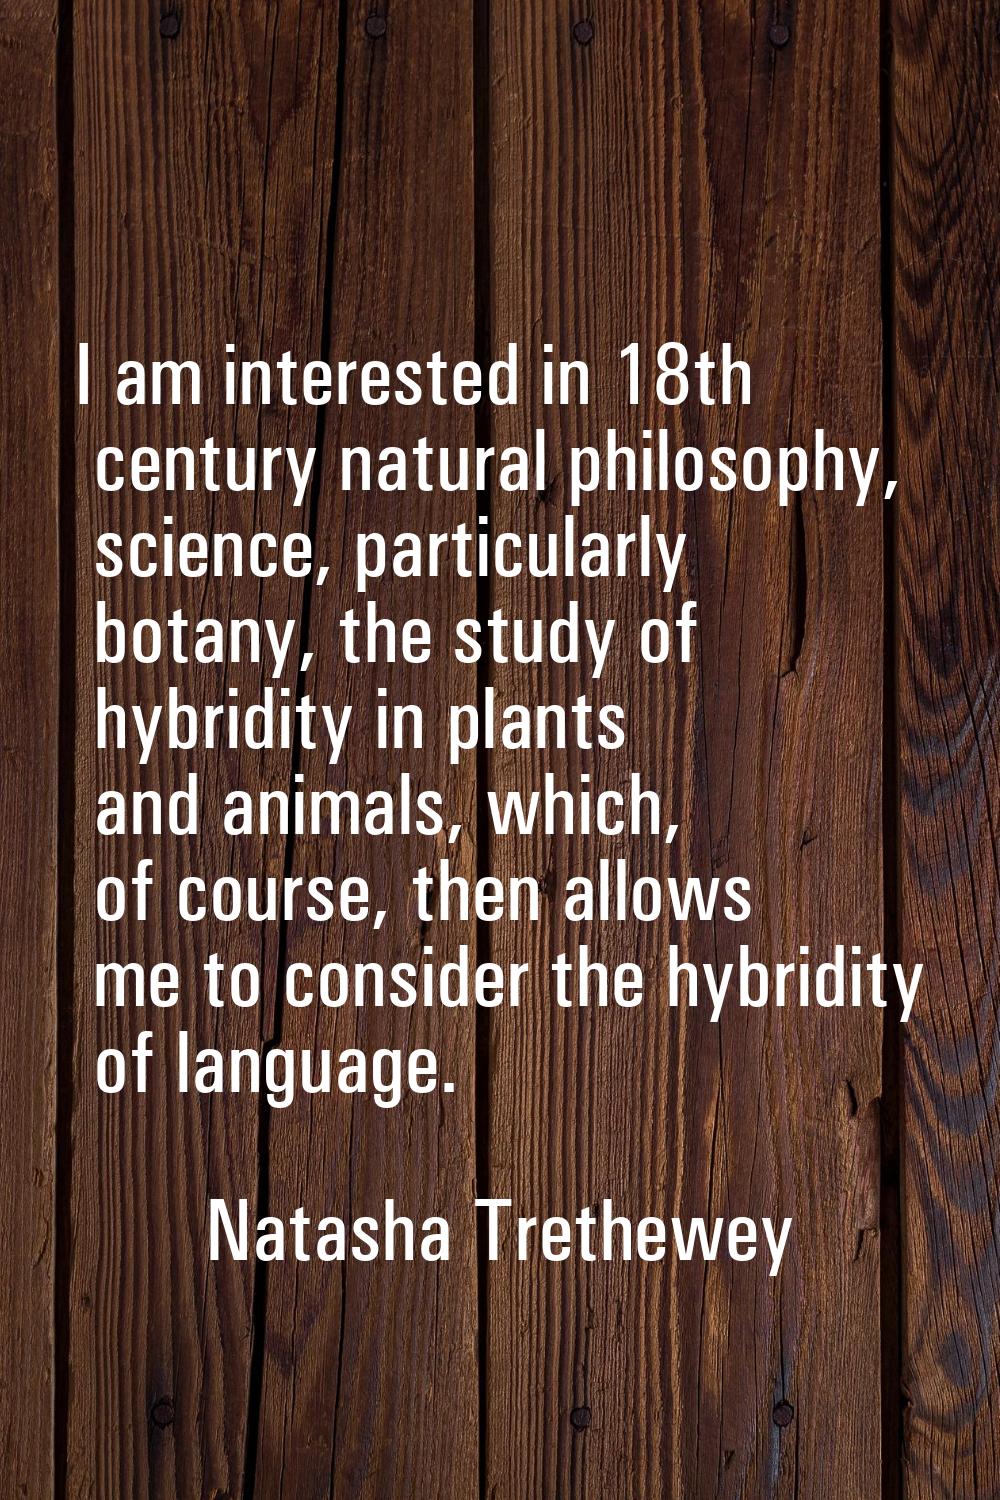 I am interested in 18th century natural philosophy, science, particularly botany, the study of hybr